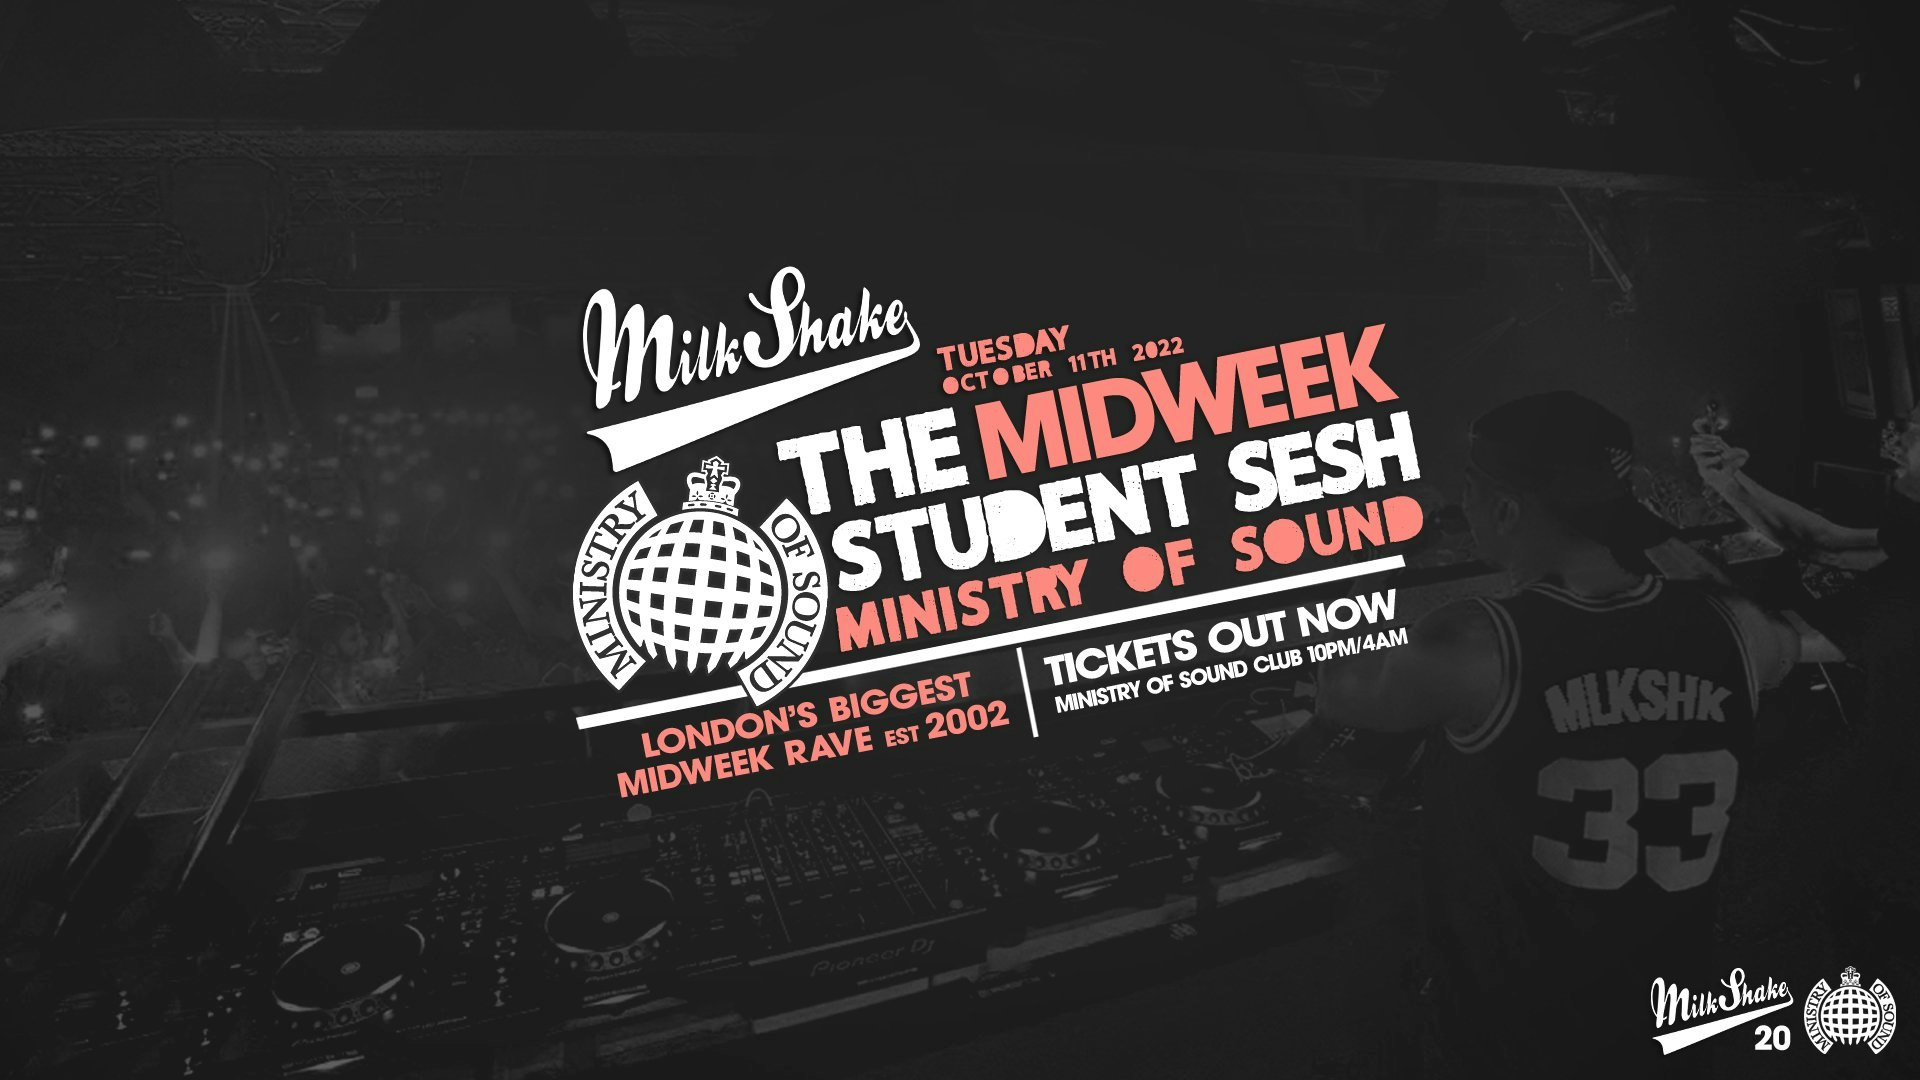 ⚠️ SOLD OUT ⚠️  Milkshake, Ministry of Sound | London’s Biggest Student Night 🔥 Oct 11th 🌍 ⚠️ SOLD OUT ⚠️